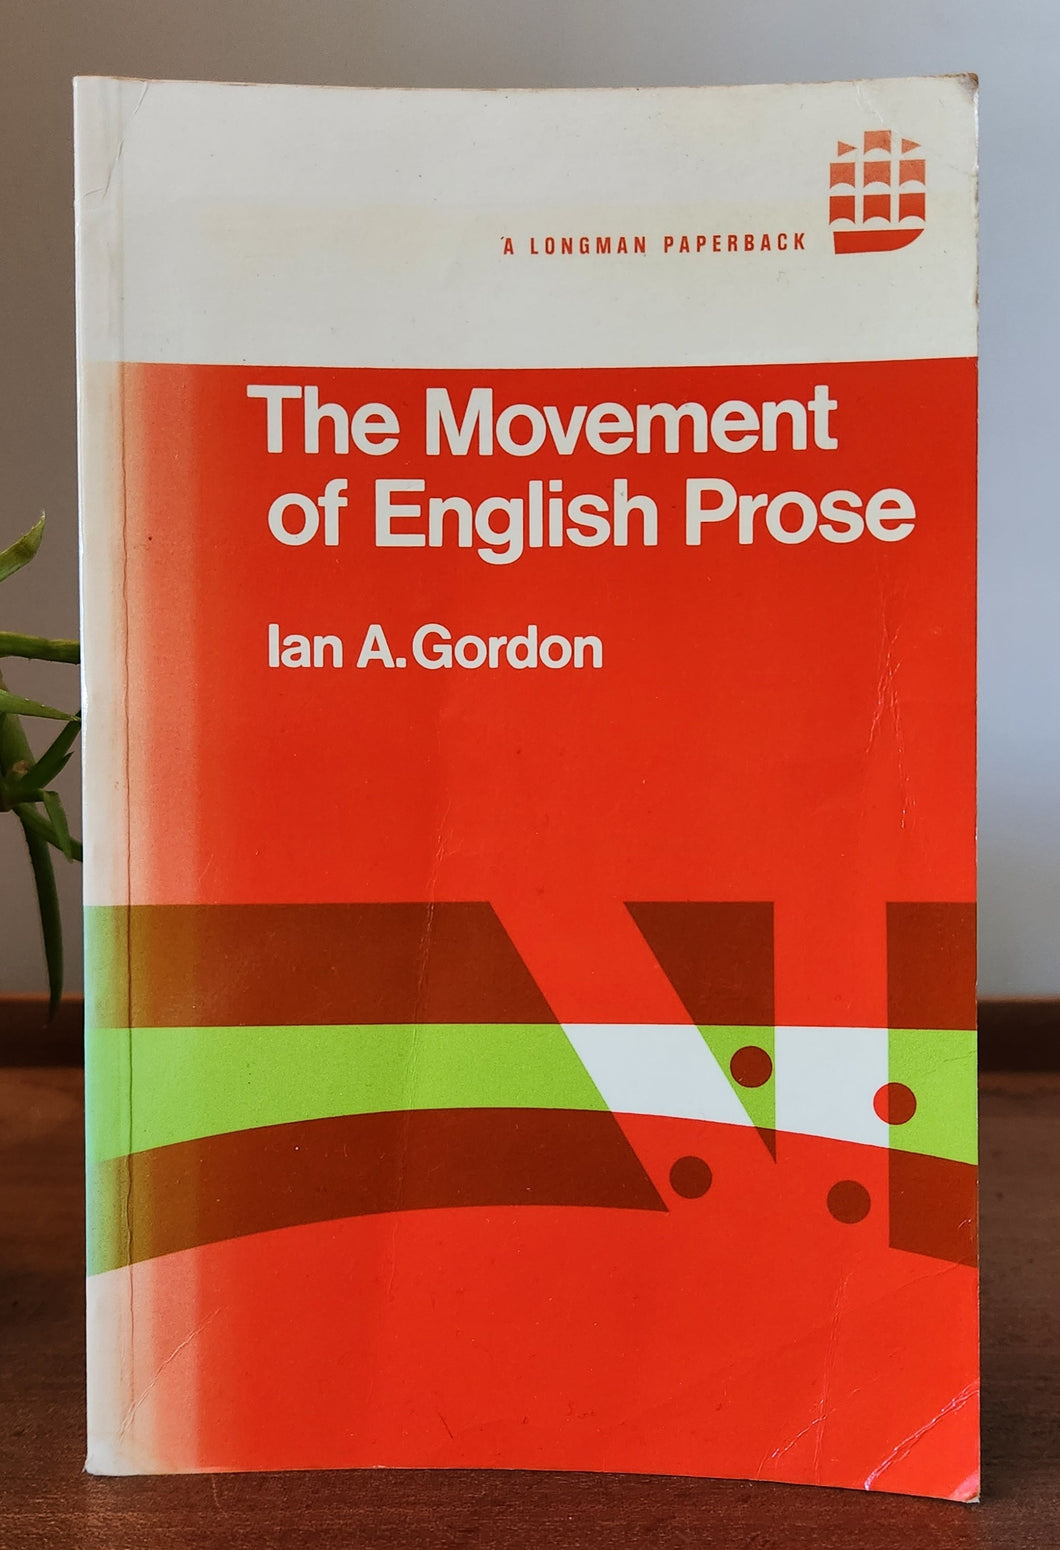 The Movement of English Prose by Ian A. Gordon